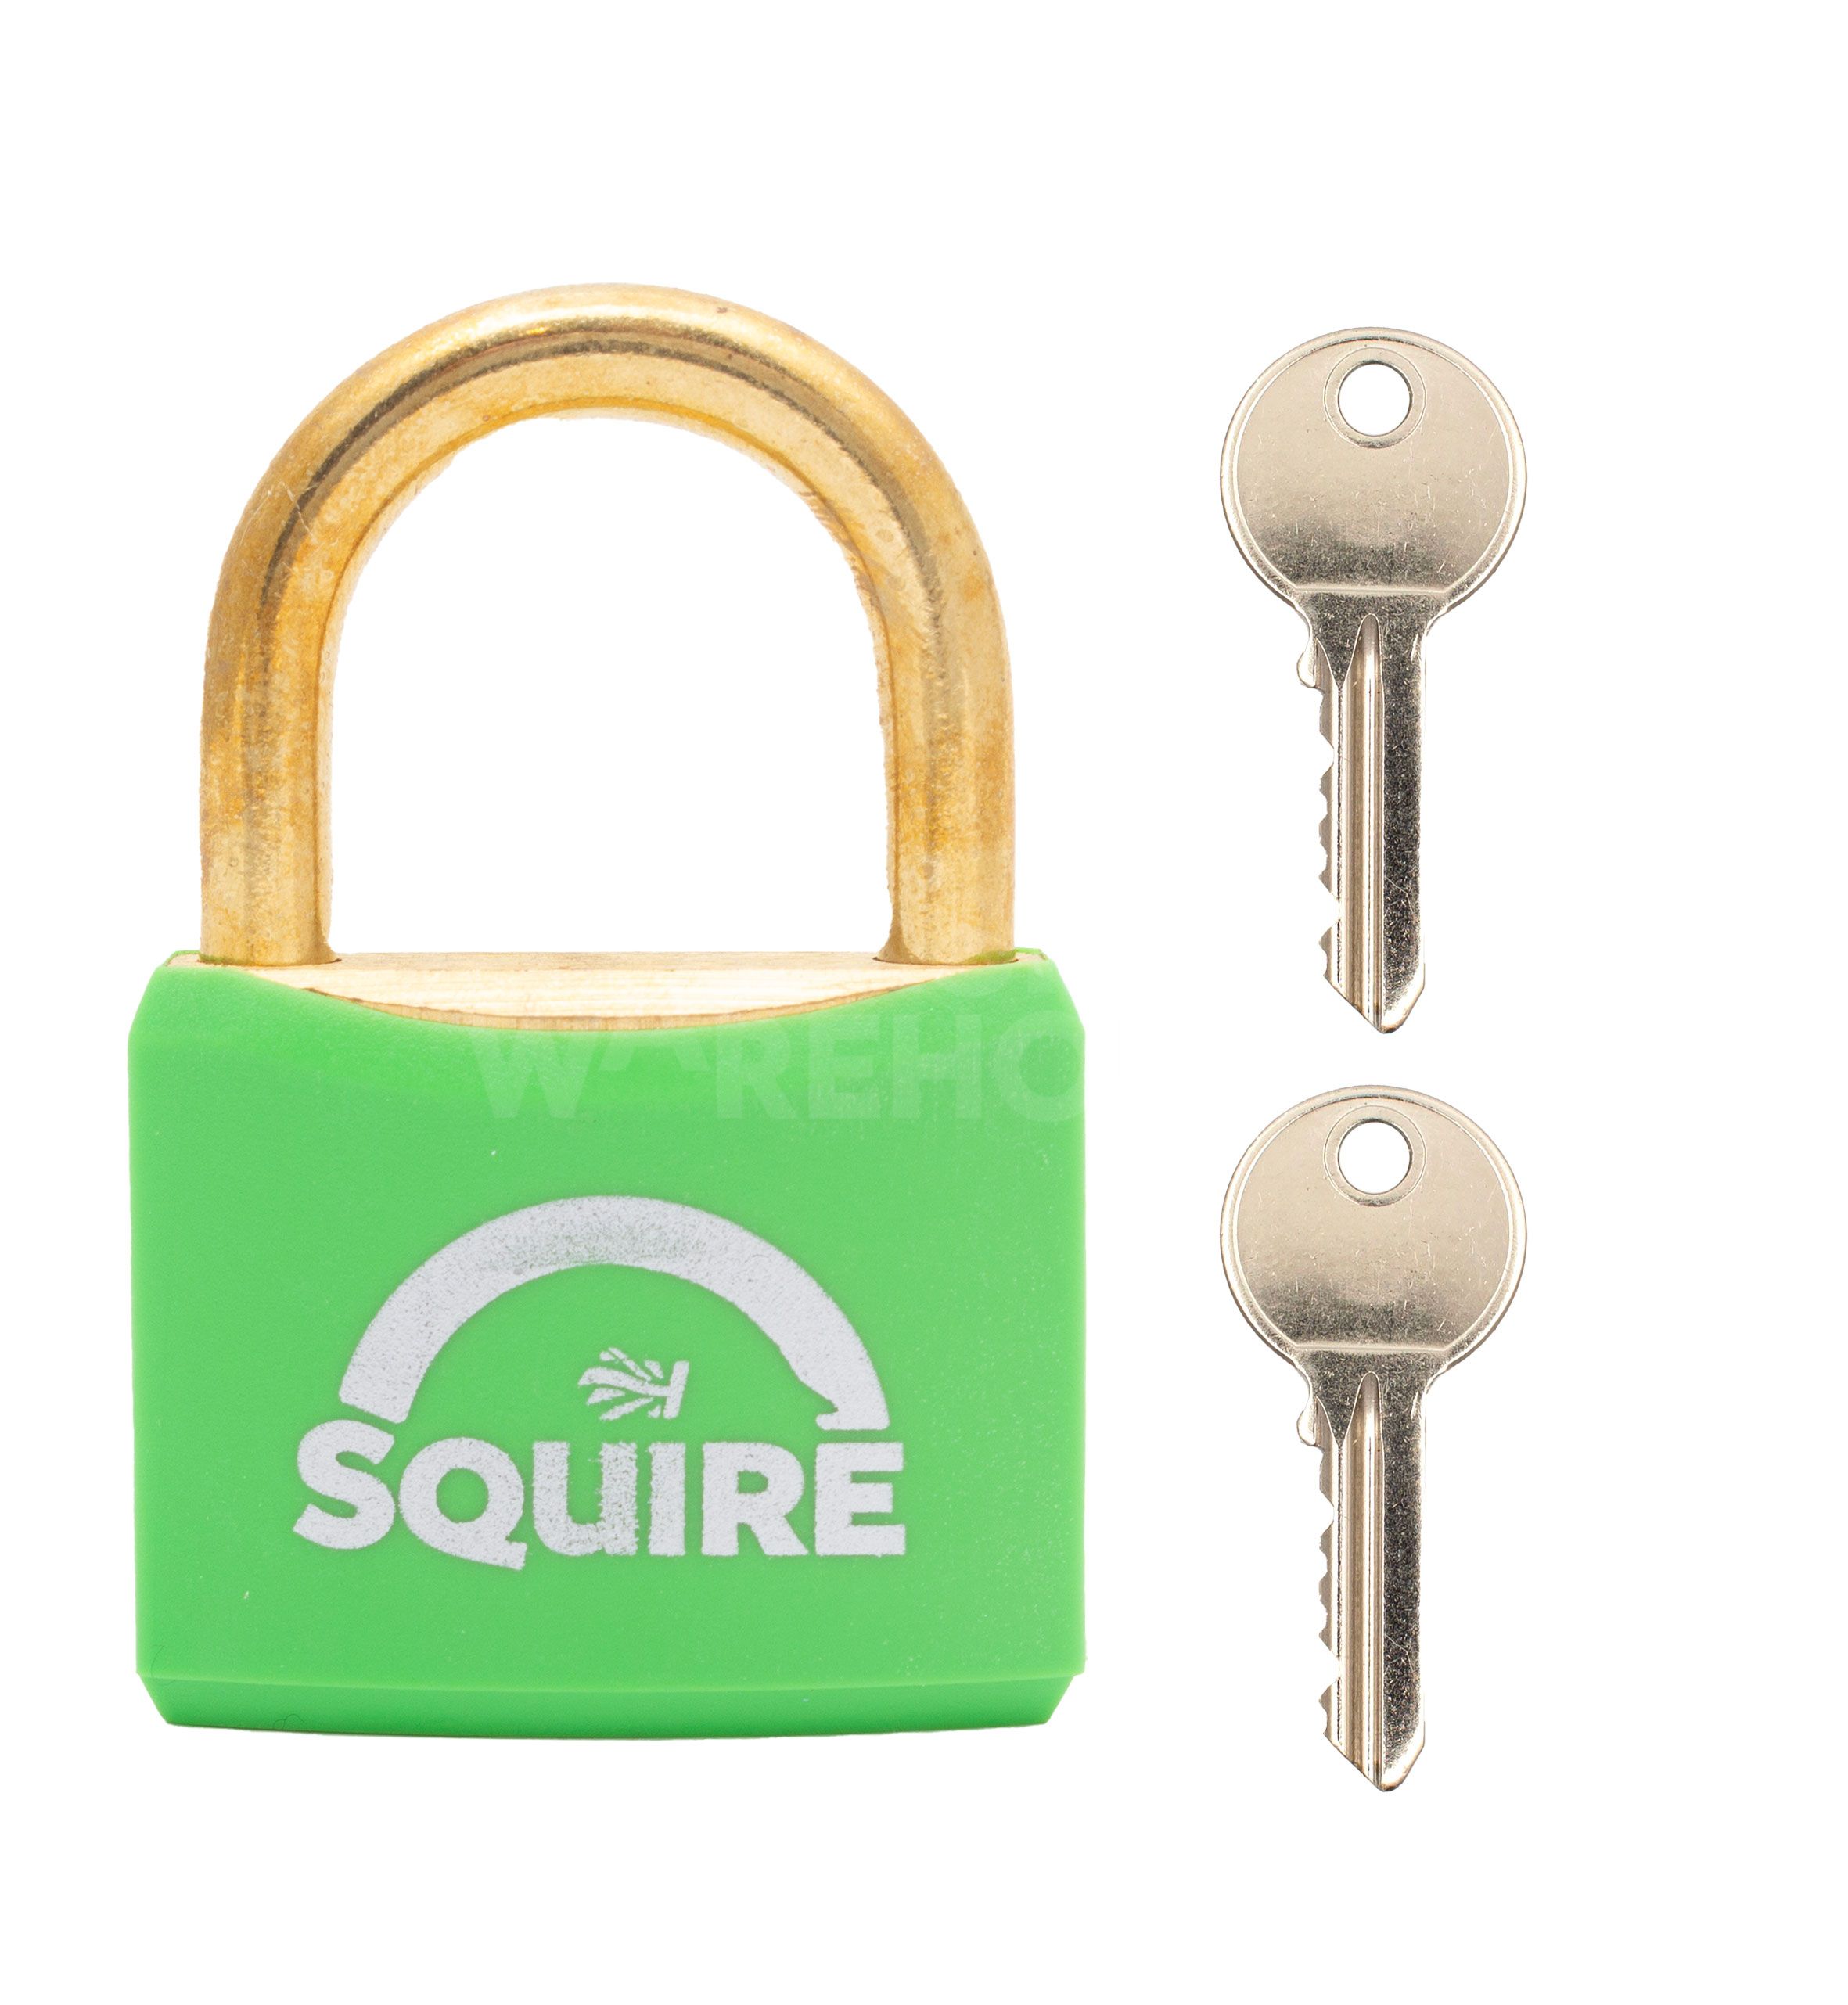 Dimensions Image: SQUIRE BR40 Brass Lock Off Padlocks